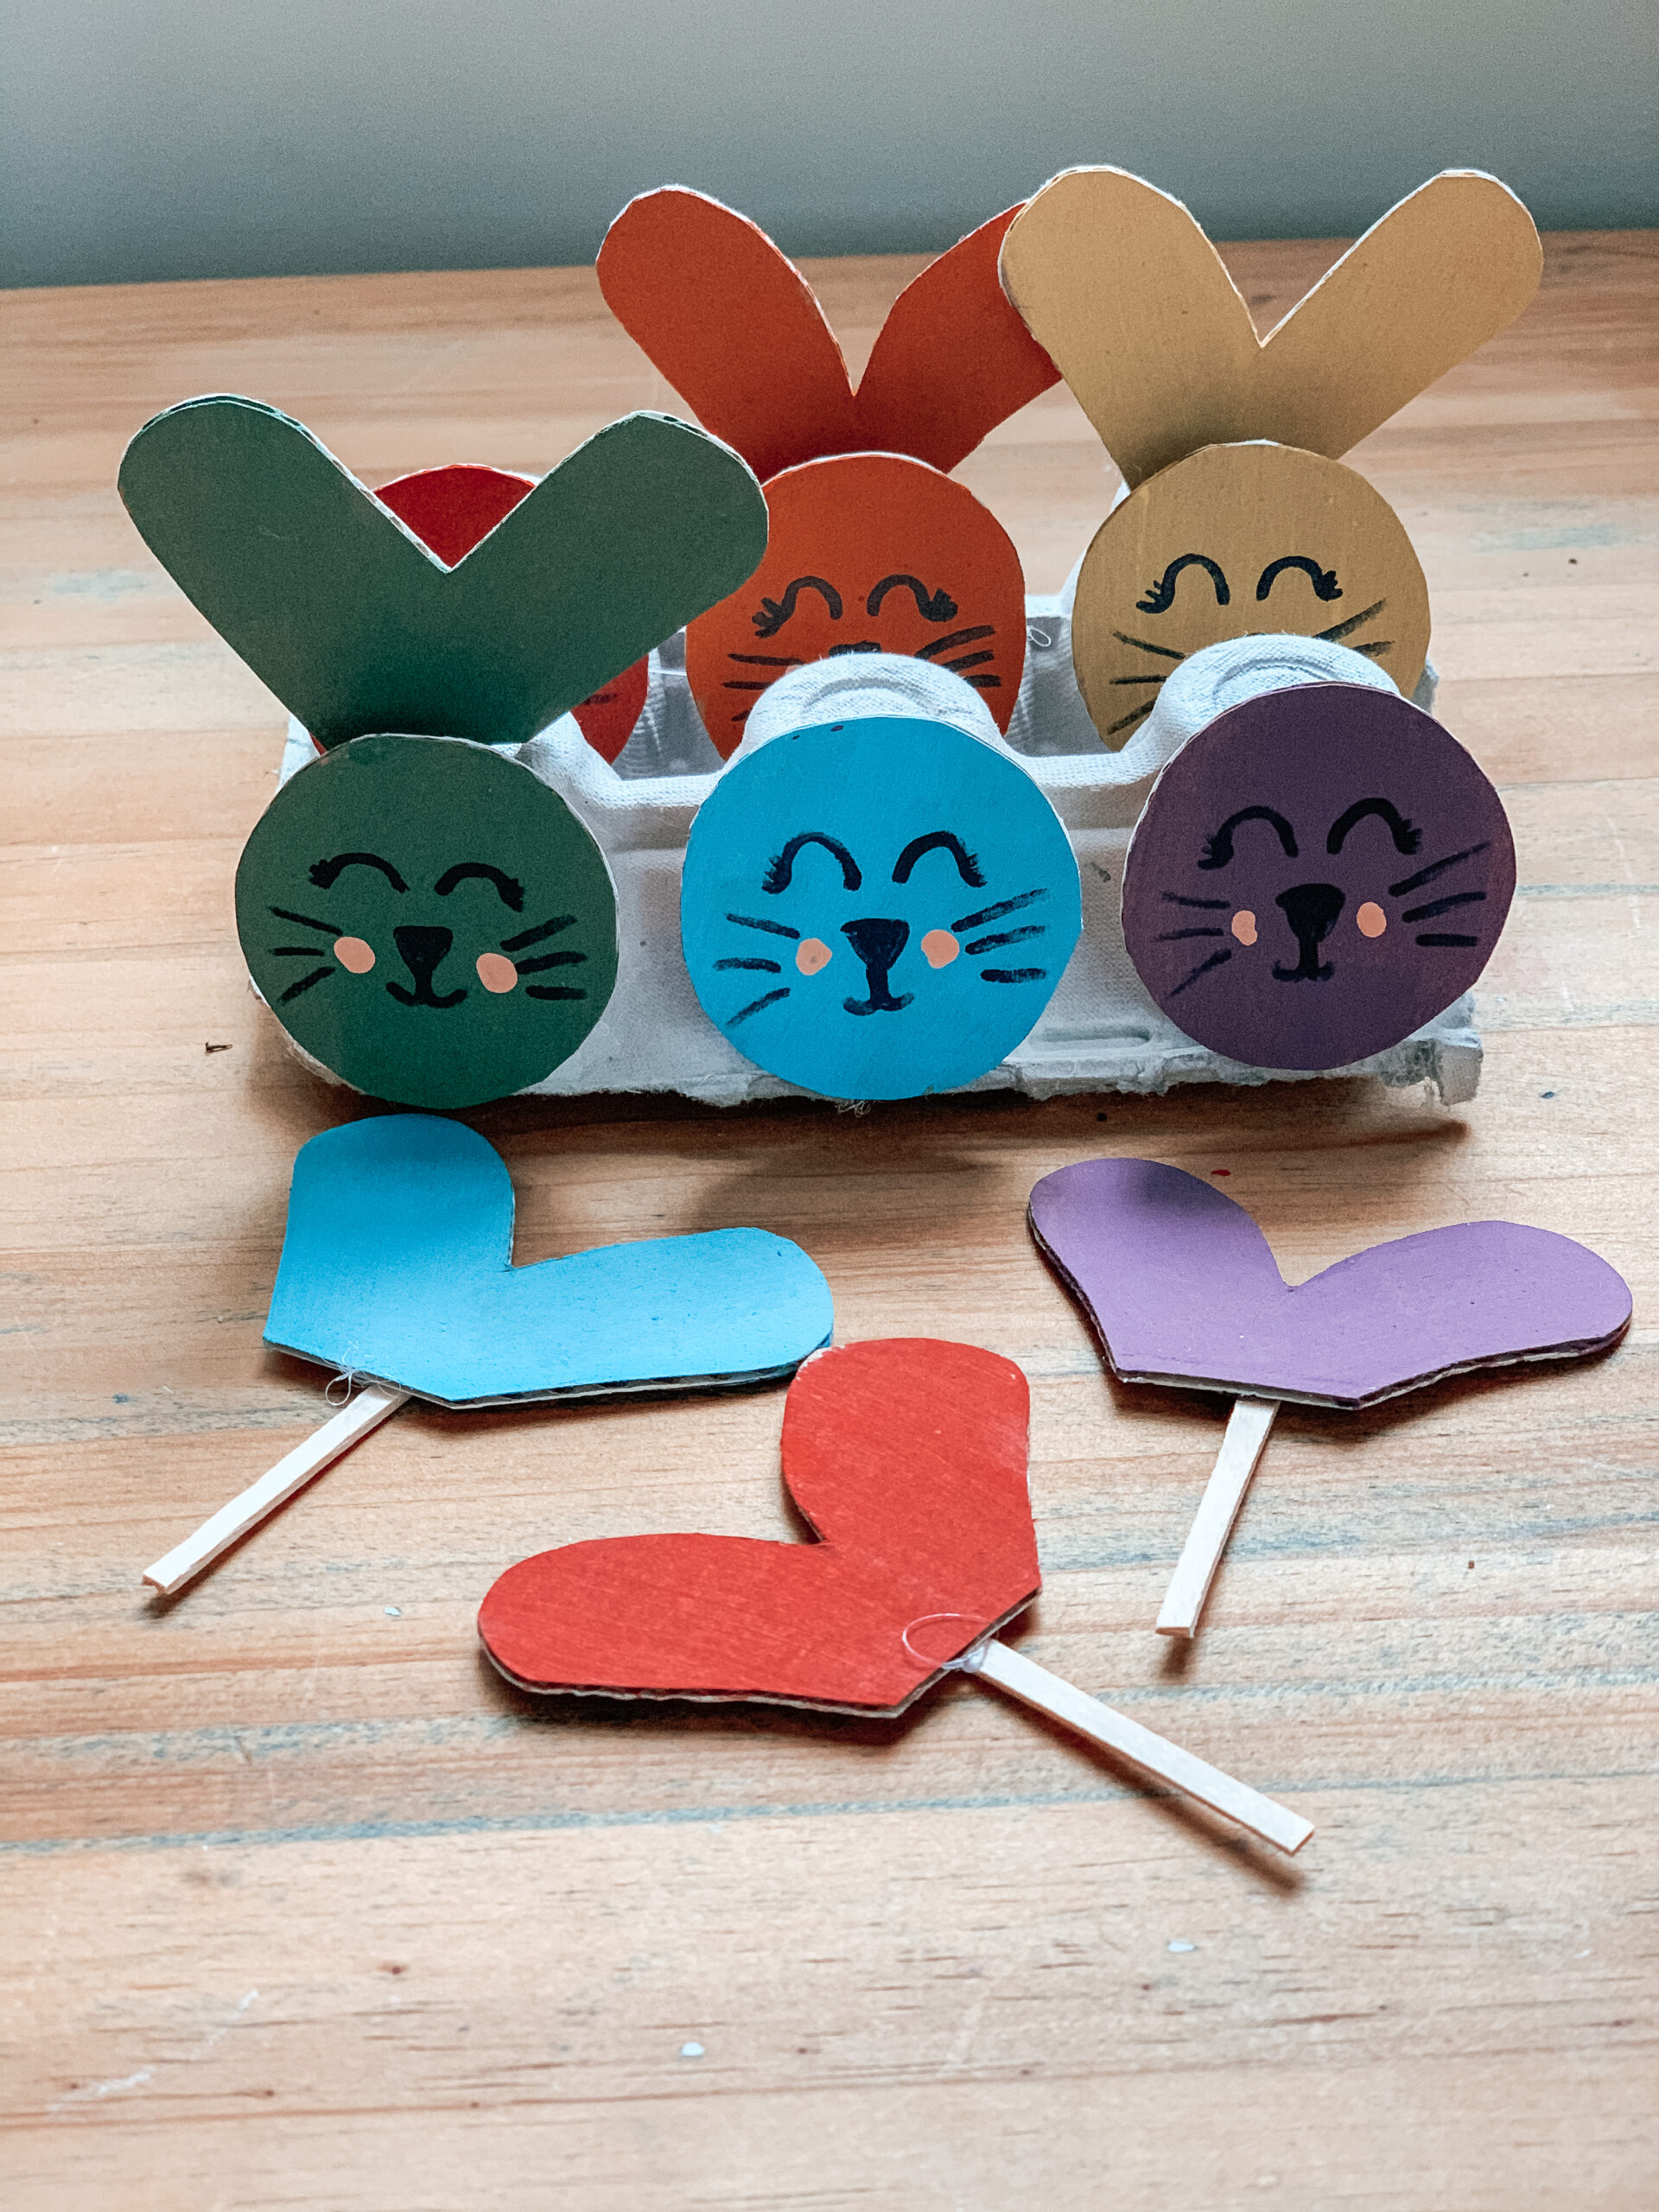 Color matching bunny activity. Strengthens fine motor skills